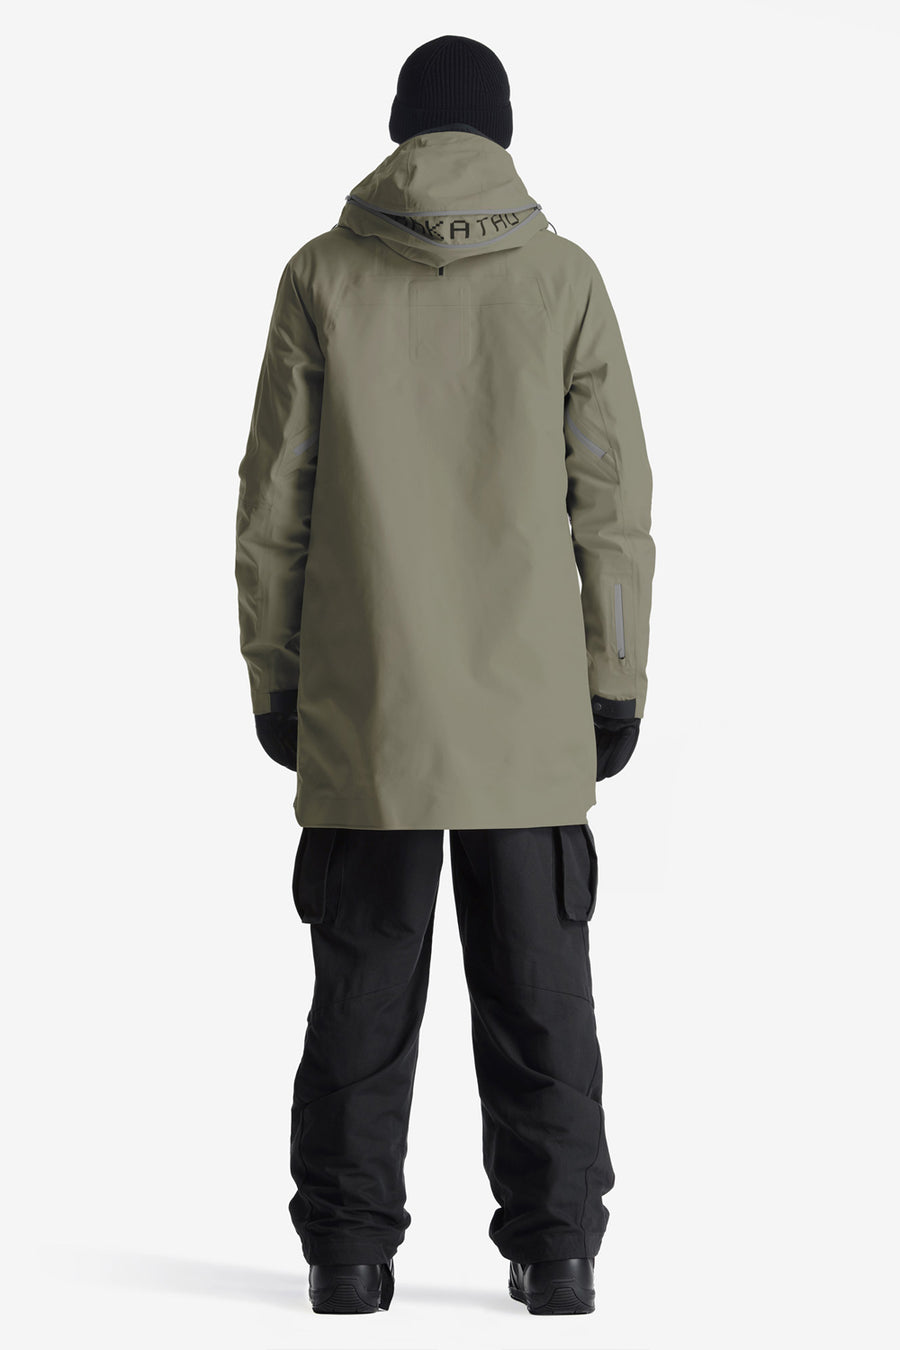 Buy the Krakatau Planck Liner Parka in Fossil at Intro. Spend £50 for free UK delivery. Official stockists. We ship worldwide.